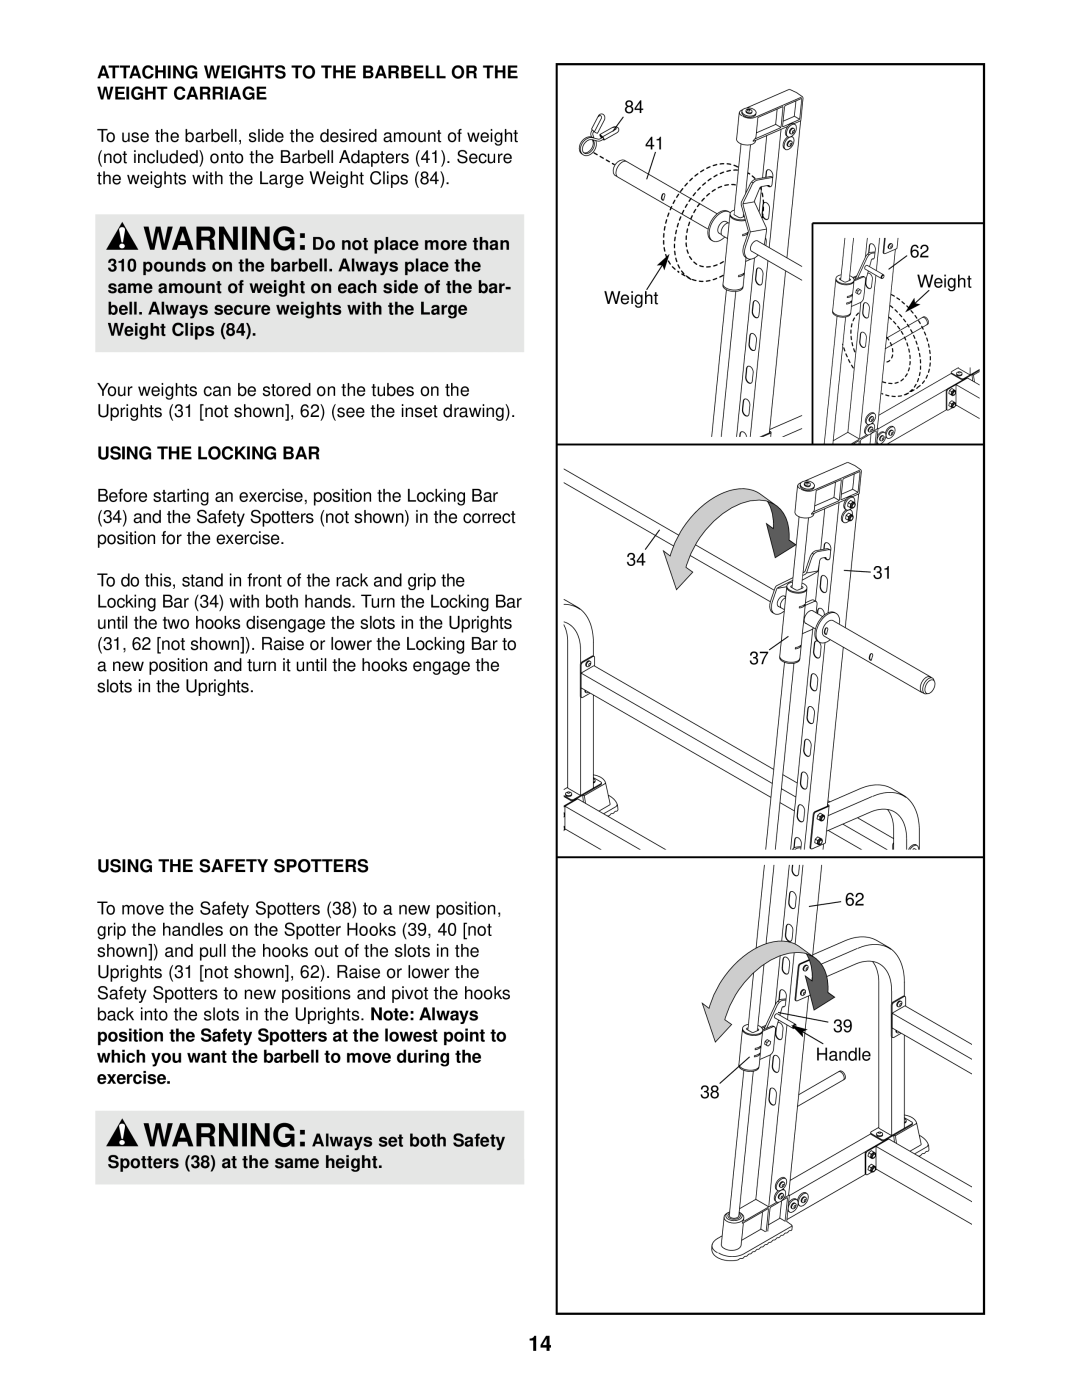 ProForm 831.150330, C800 user manual Attaching Weights To The Barbell Or The Weight Carriage, Using The Locking Bar 